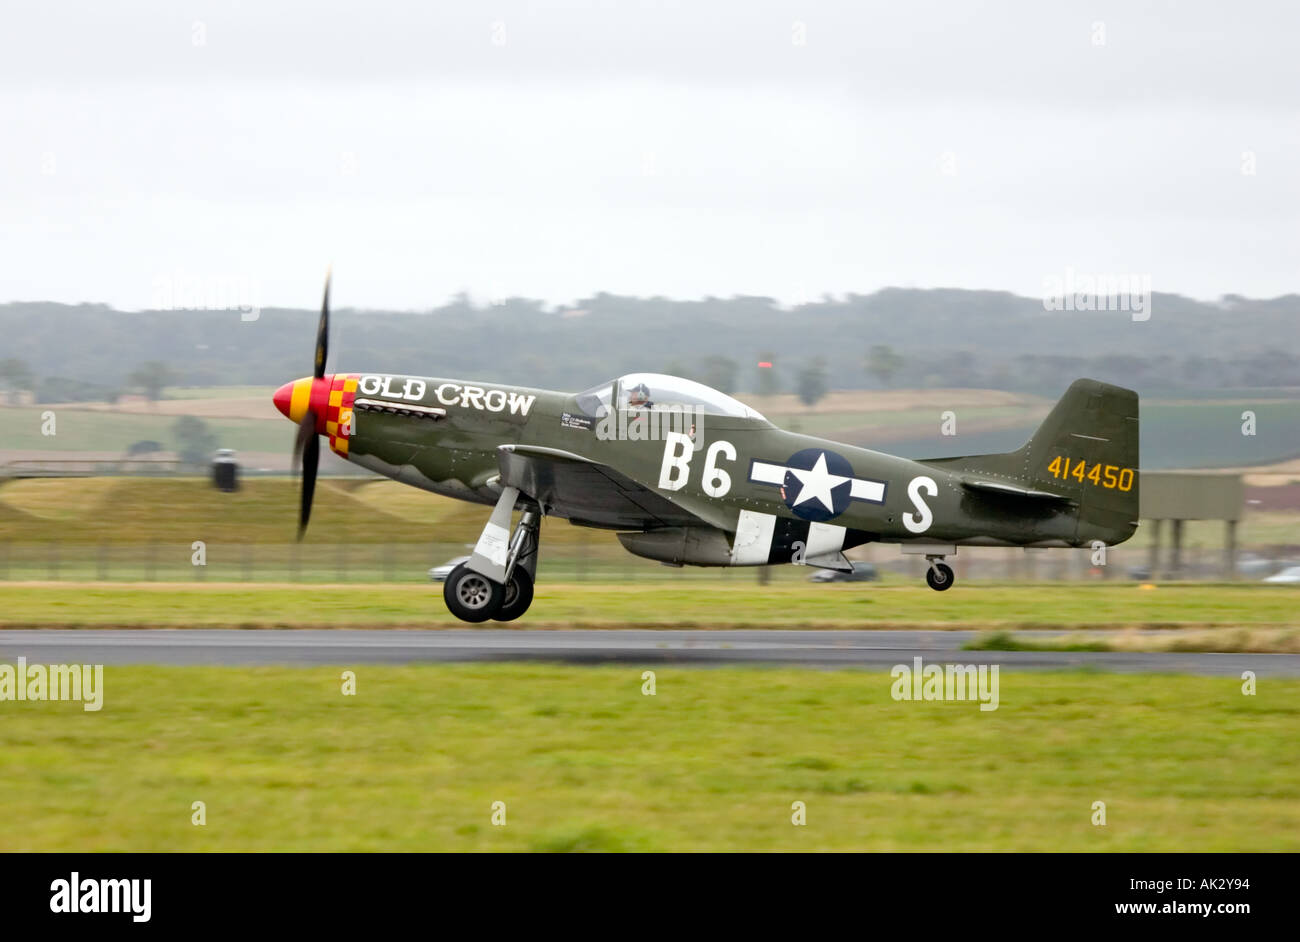 North American P 51D Mustang Old Crow lifting off on take off run Stock Photo